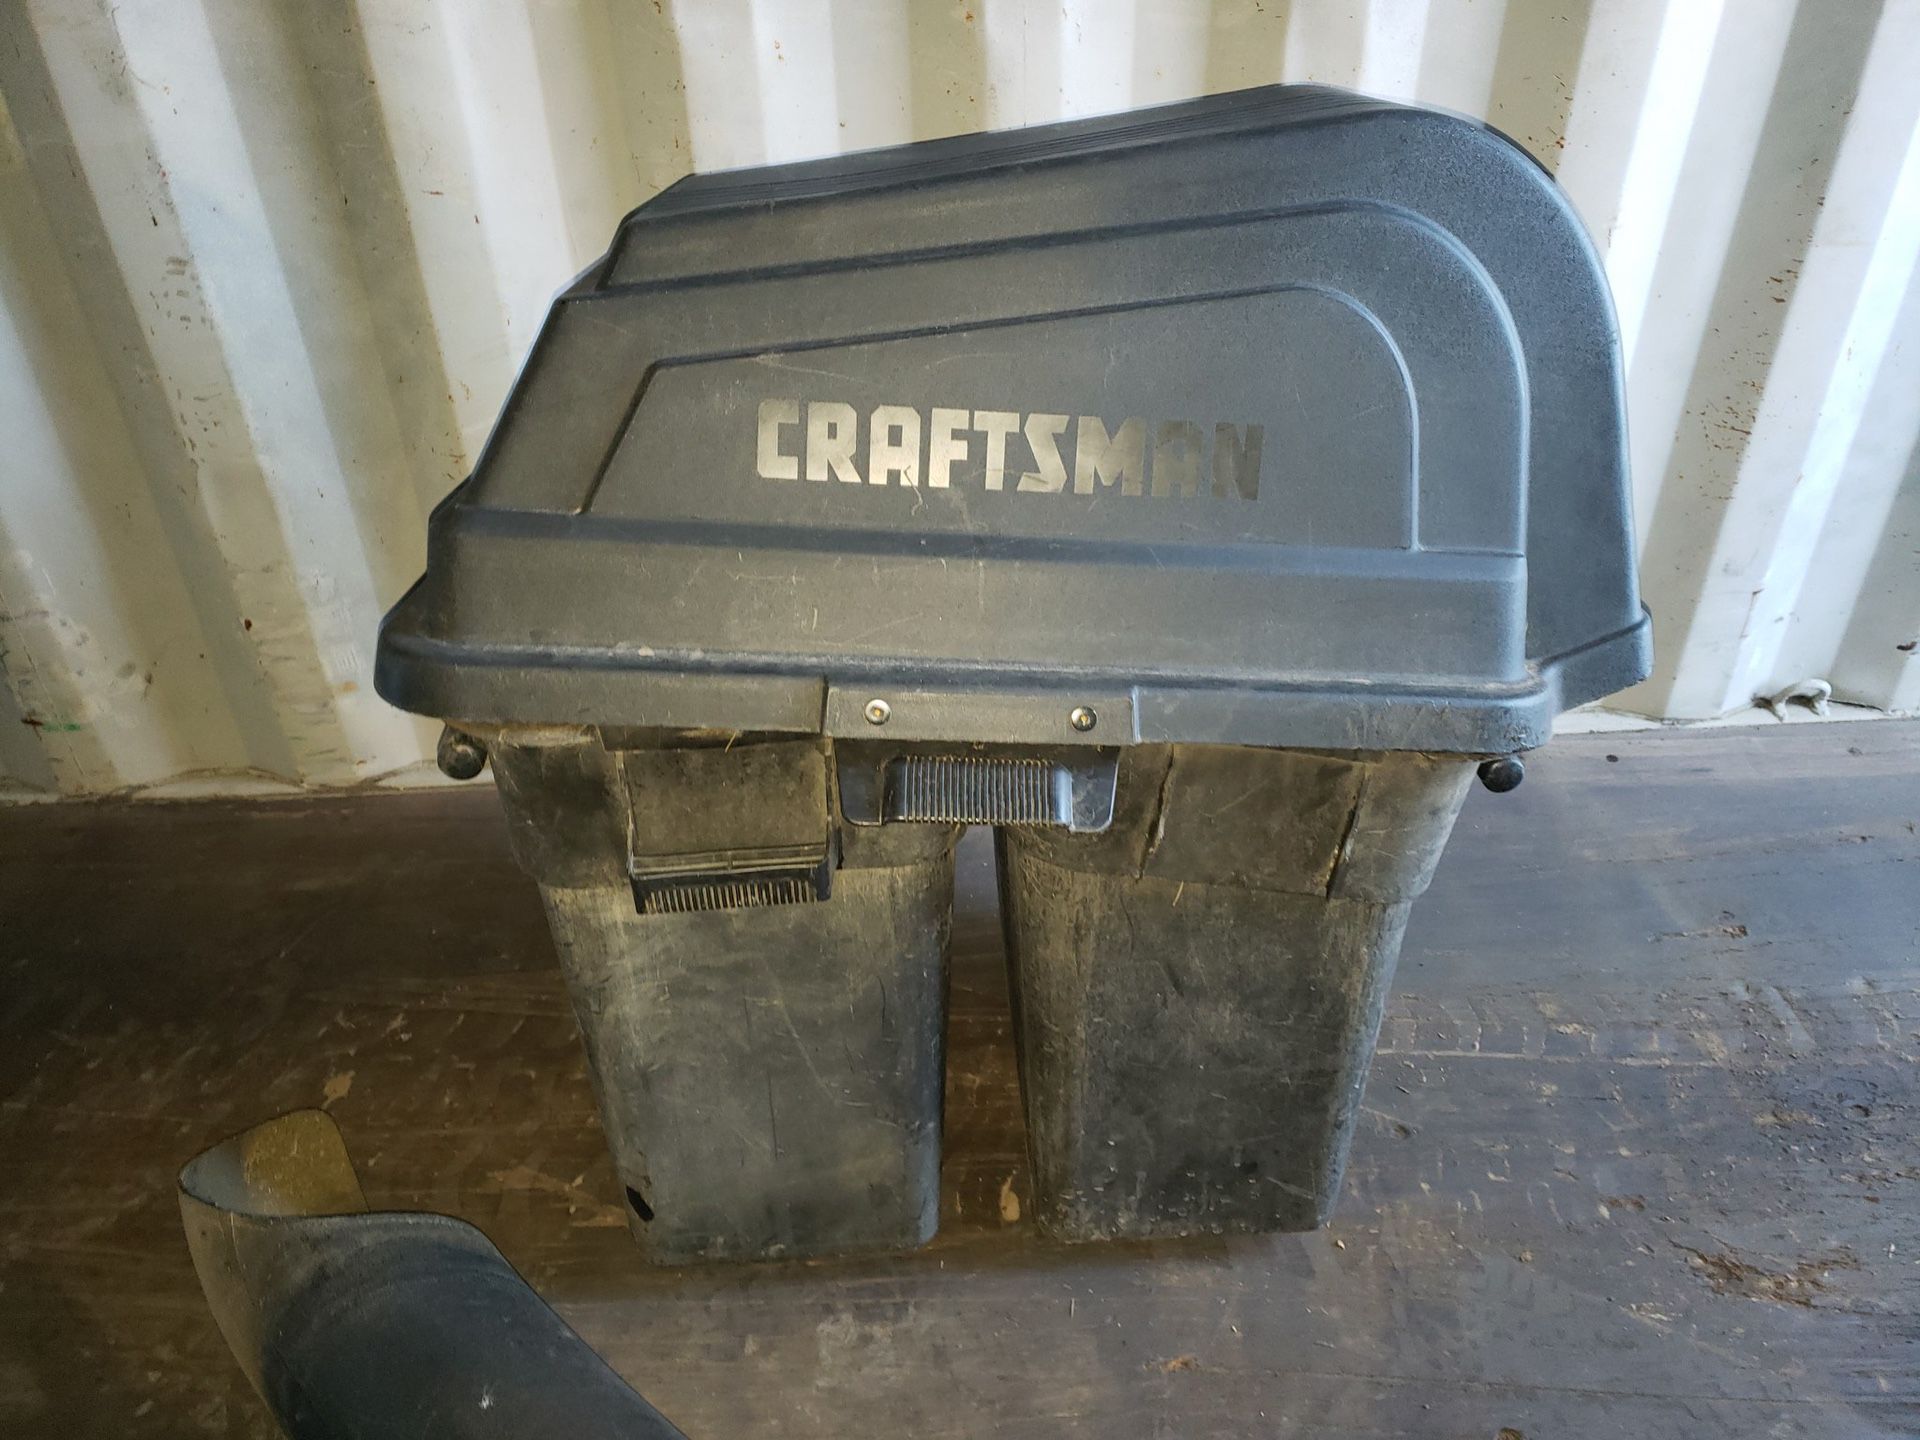 Craftsman tractor/riding lawnmower bagger system